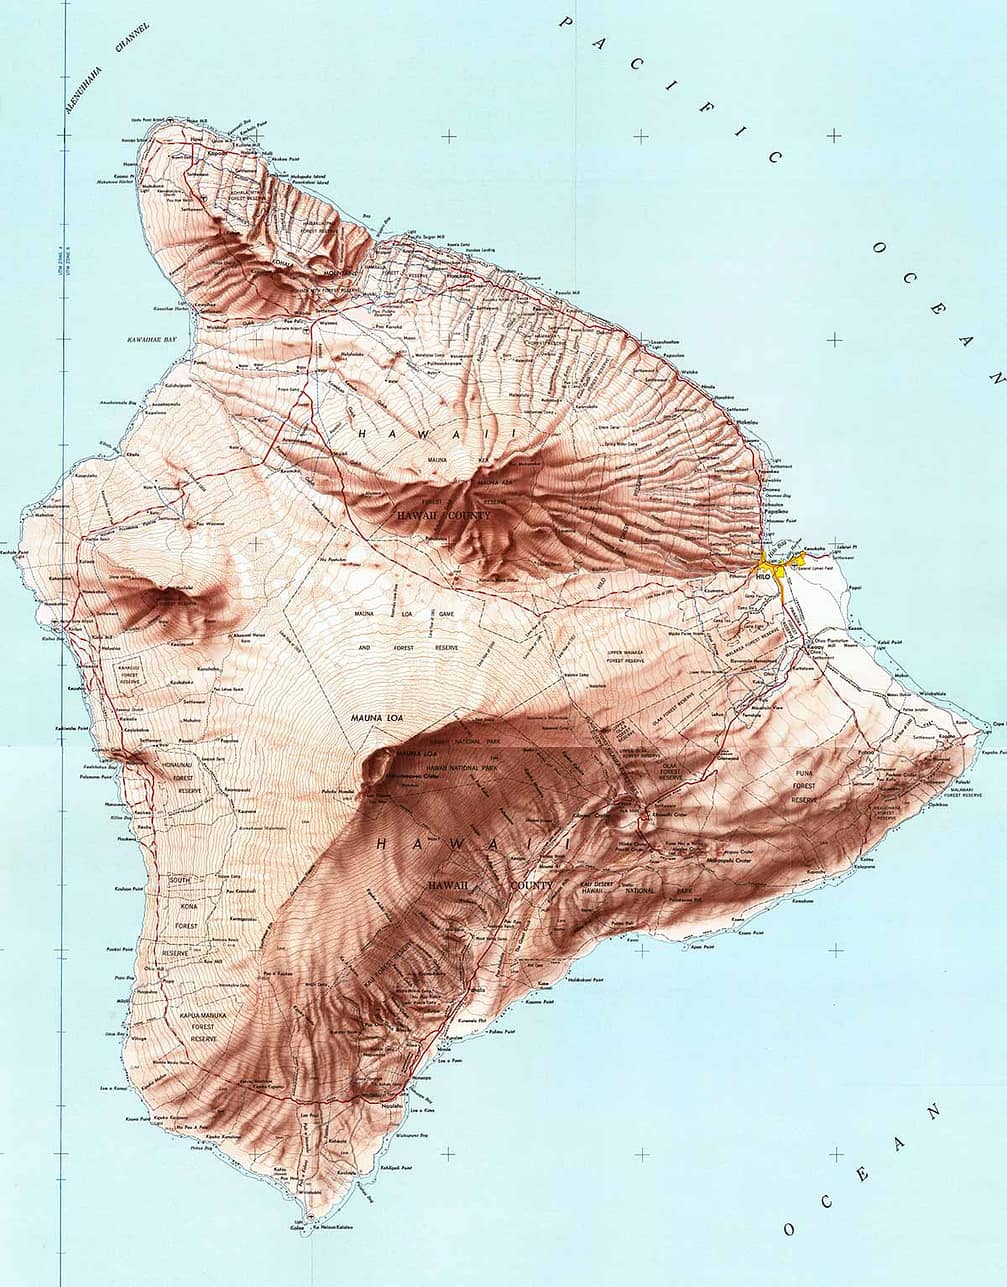 Topographic map of the island of Hawai‘i.